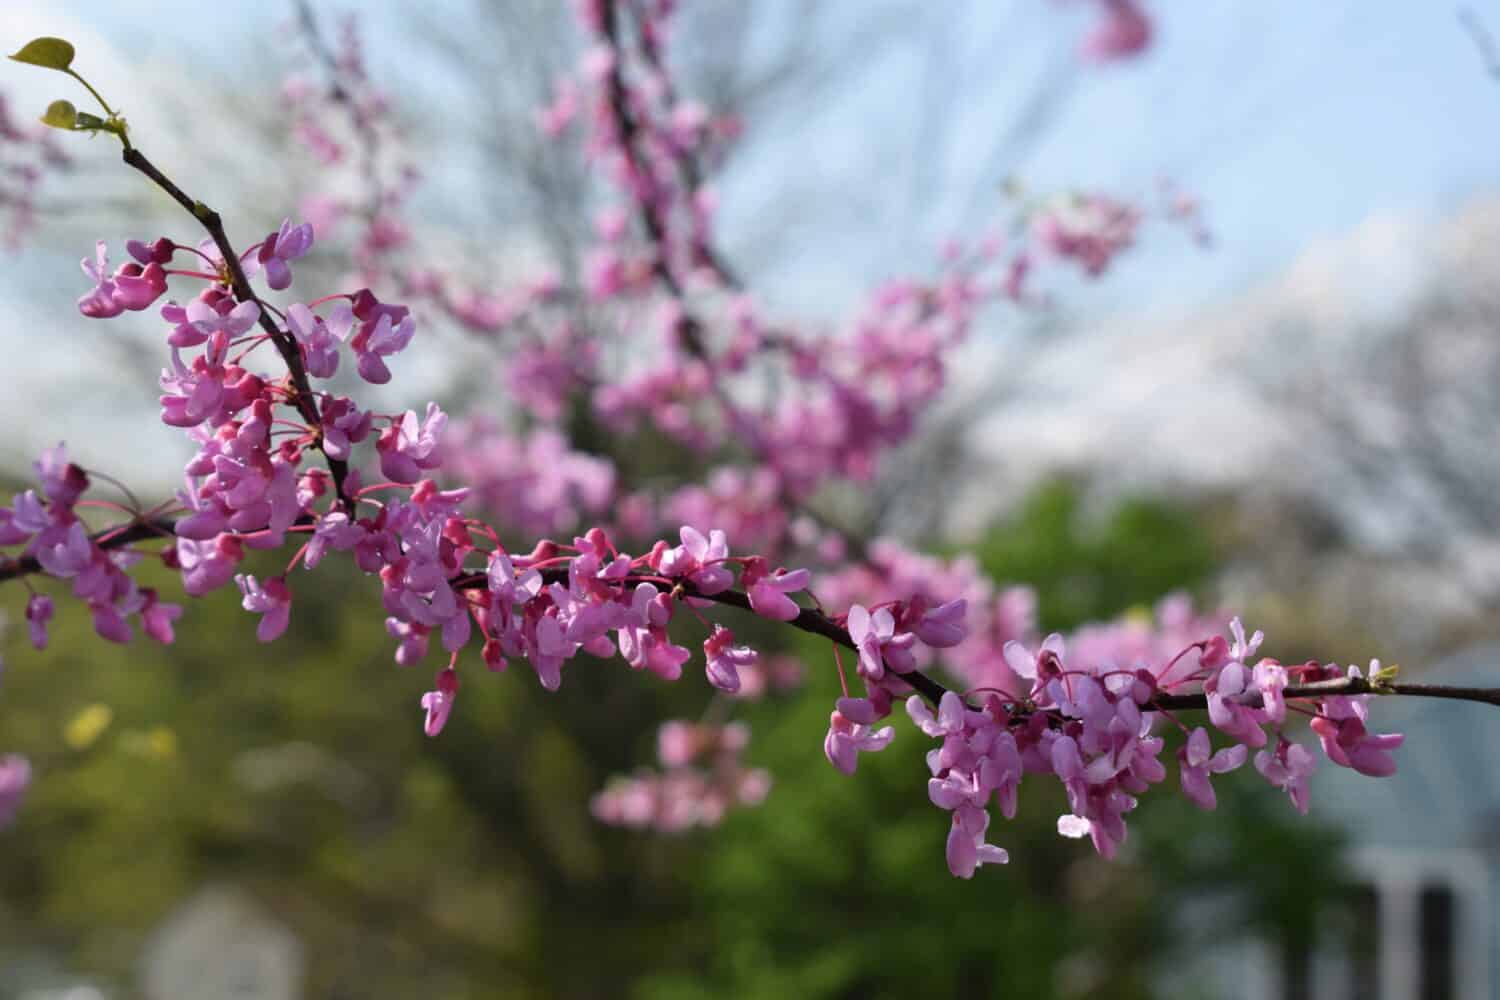 Pink Redbud Tree in bloom in early May 